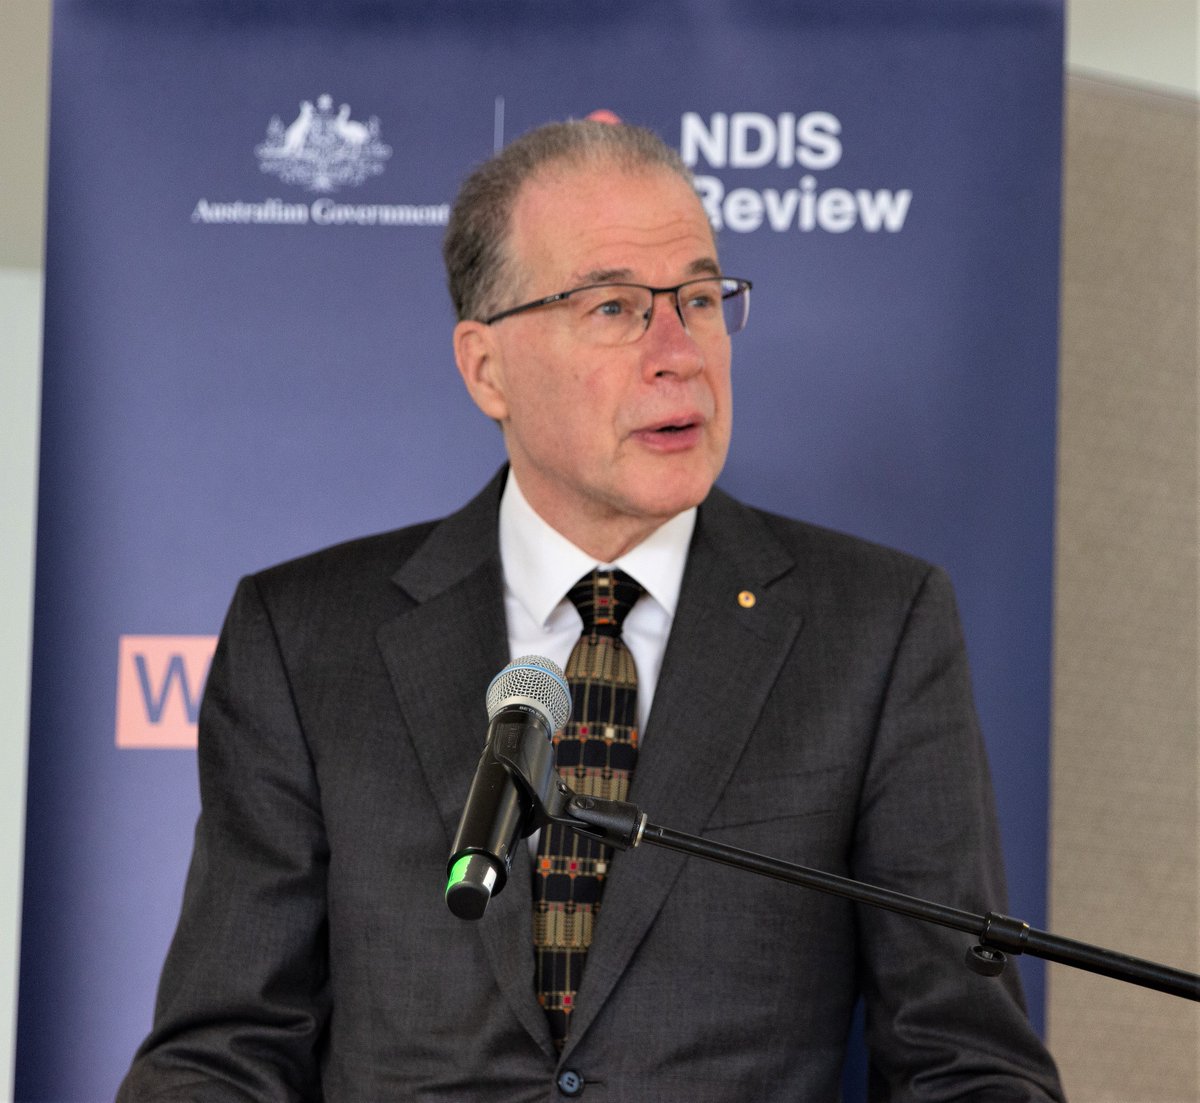 🌟 “10 reform areas for the future of the NDIS… Improve the experience of participants in the scheme” just some of the areas covered by Bruce Bonyhady in the NDIS Review speech in Geelong. It is available for re-watching! 💡 ndisreview.gov.au/resources/vide…